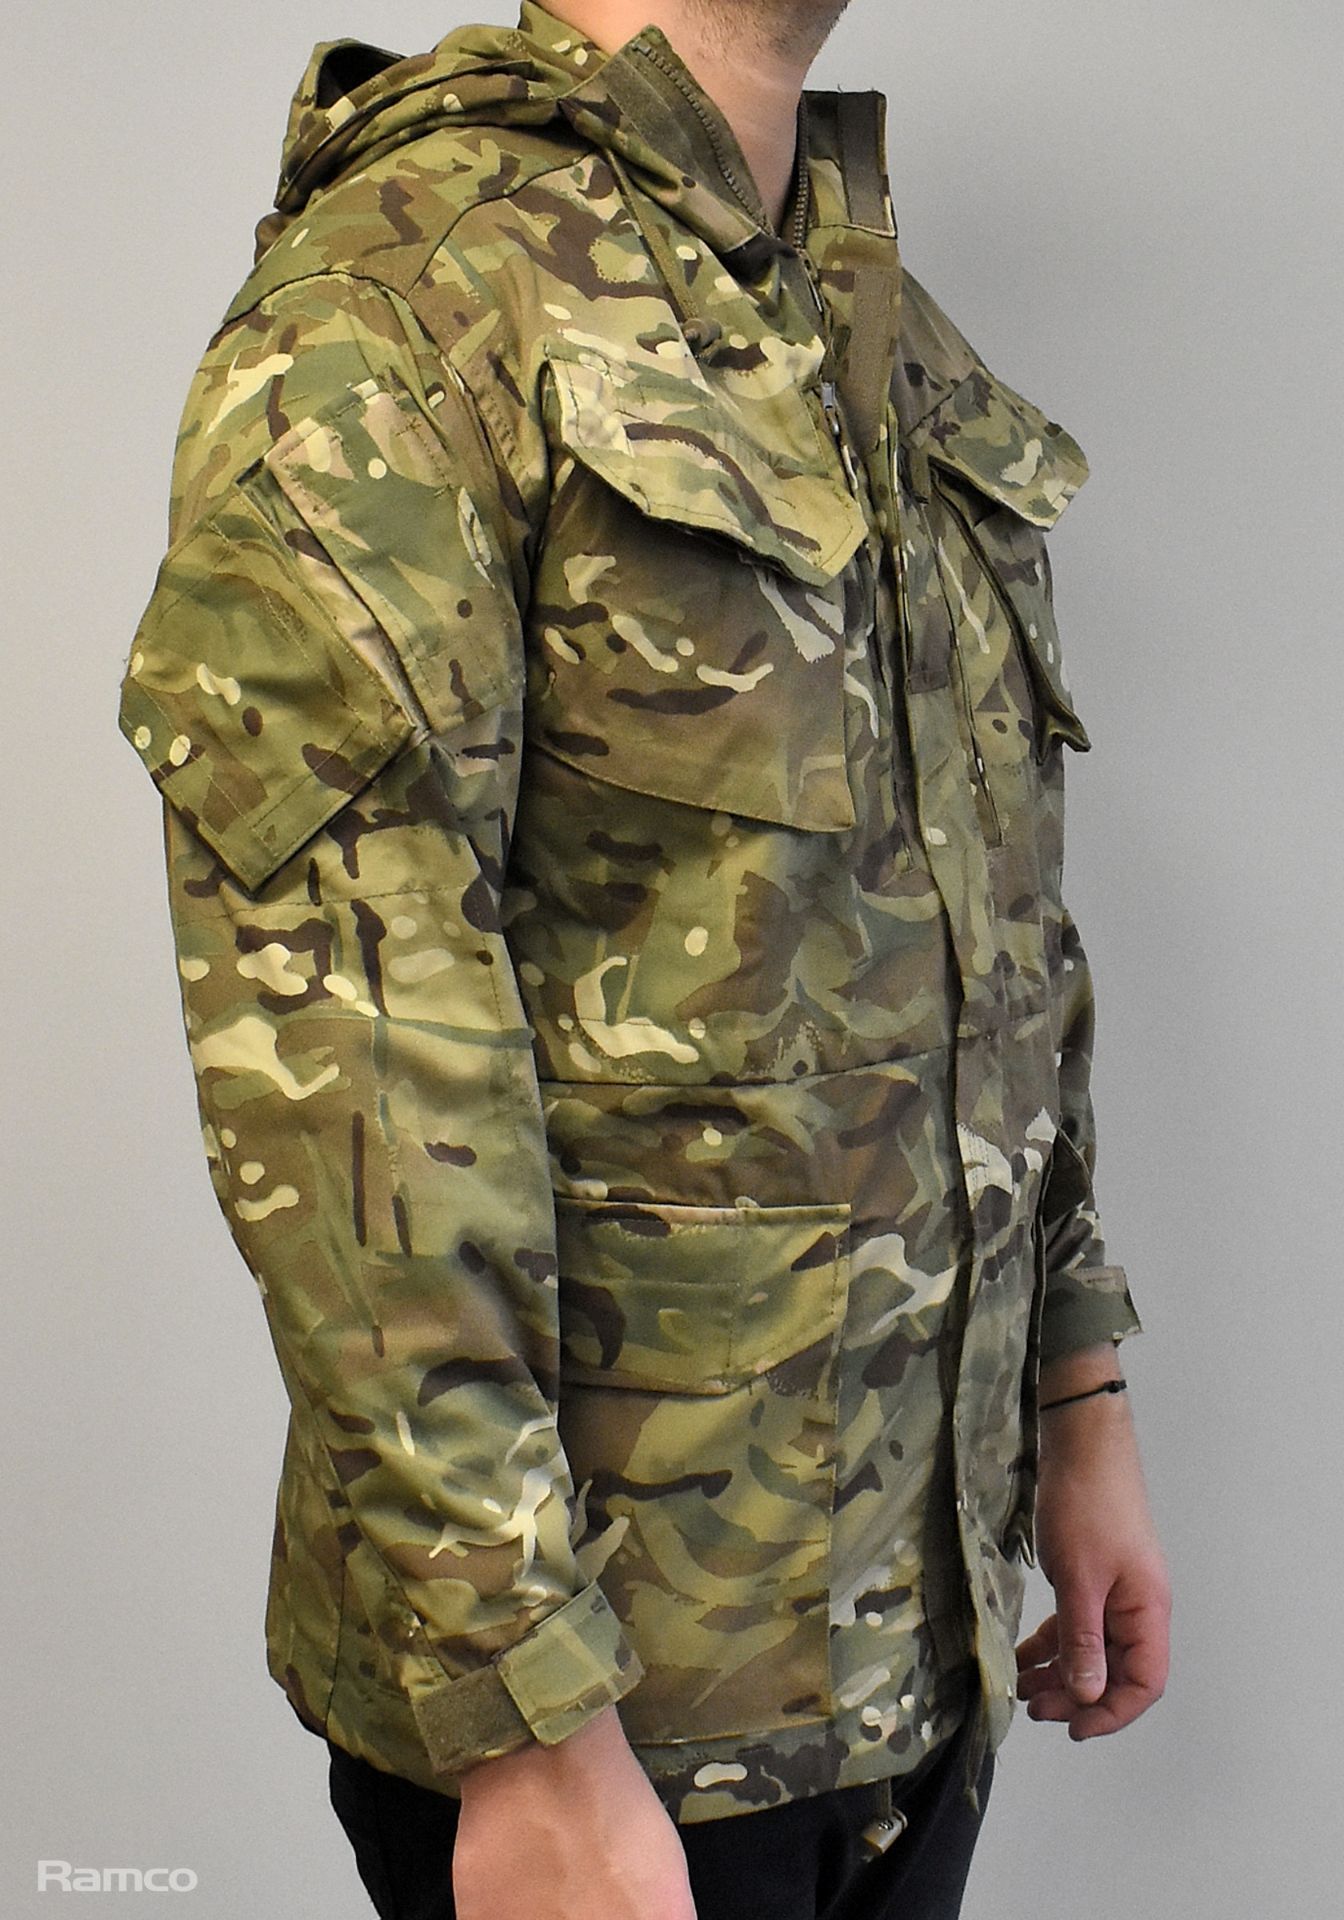 45x British Army MTP combat smocks 2 windproof - mixed grades and sizes - Image 4 of 12